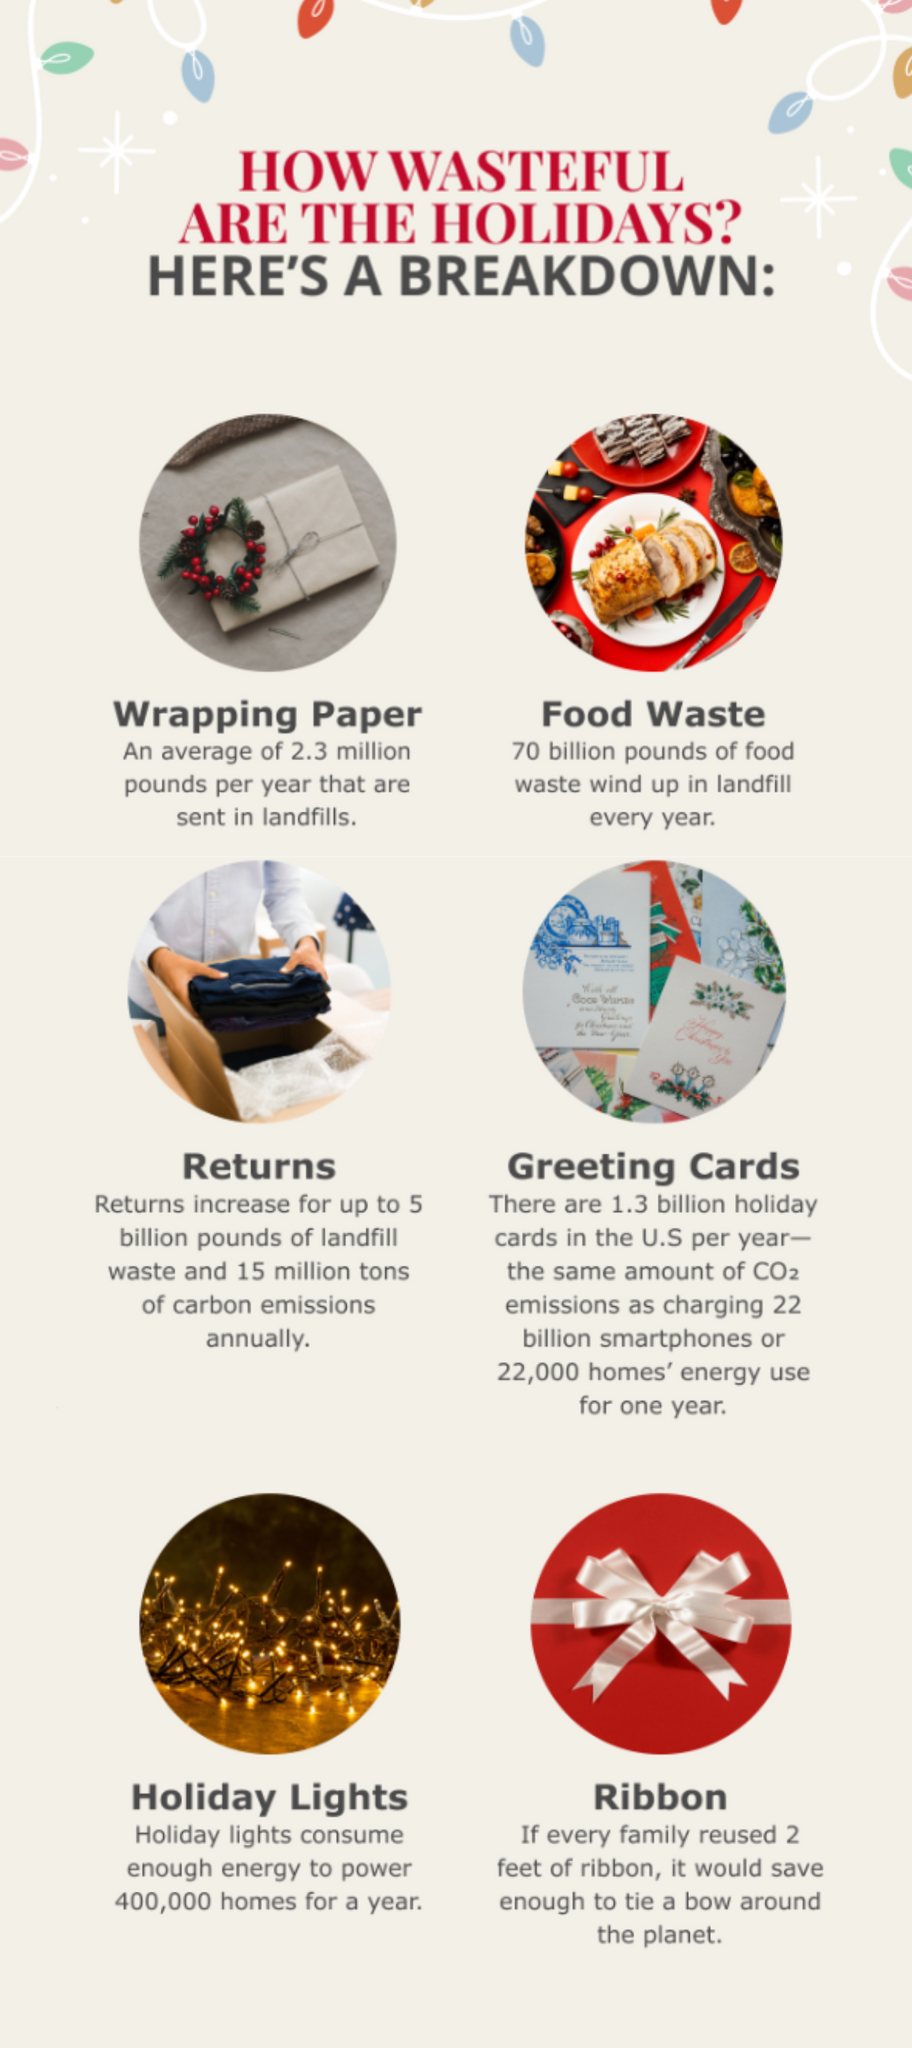 How Wasteful are the Holidays? A breakdown: